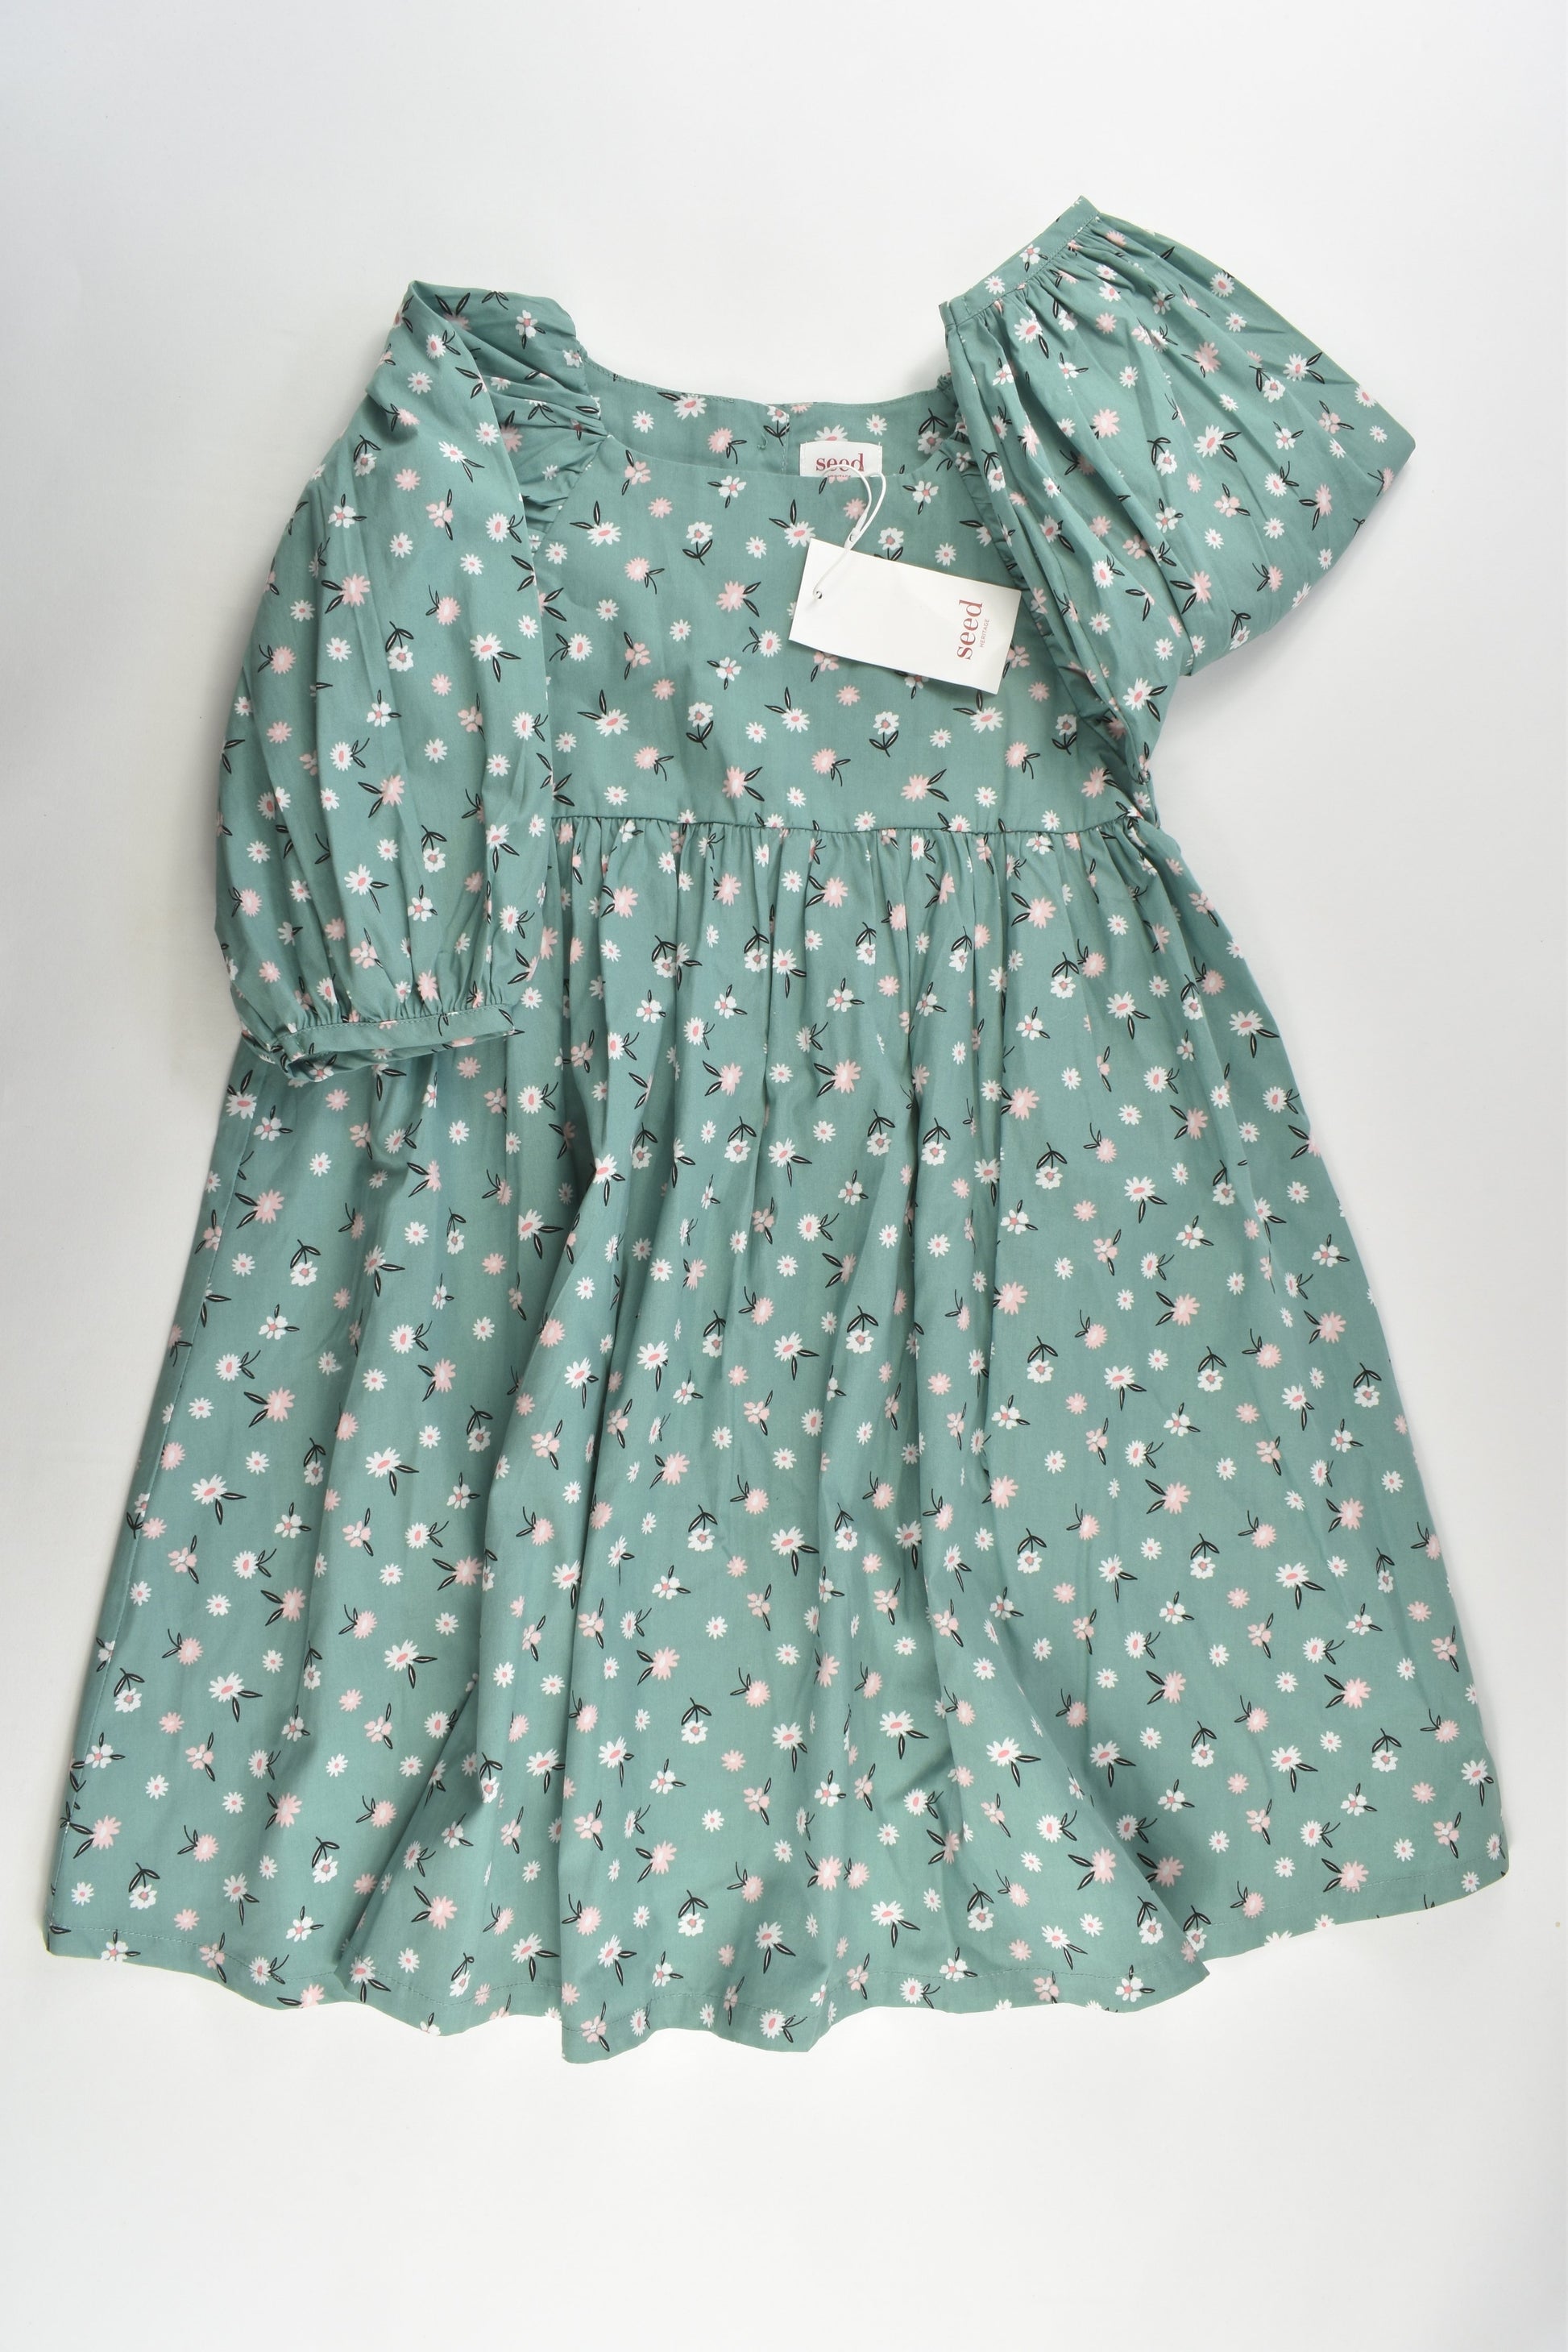 NEW Seed Heritage Size 6 Floral Dress